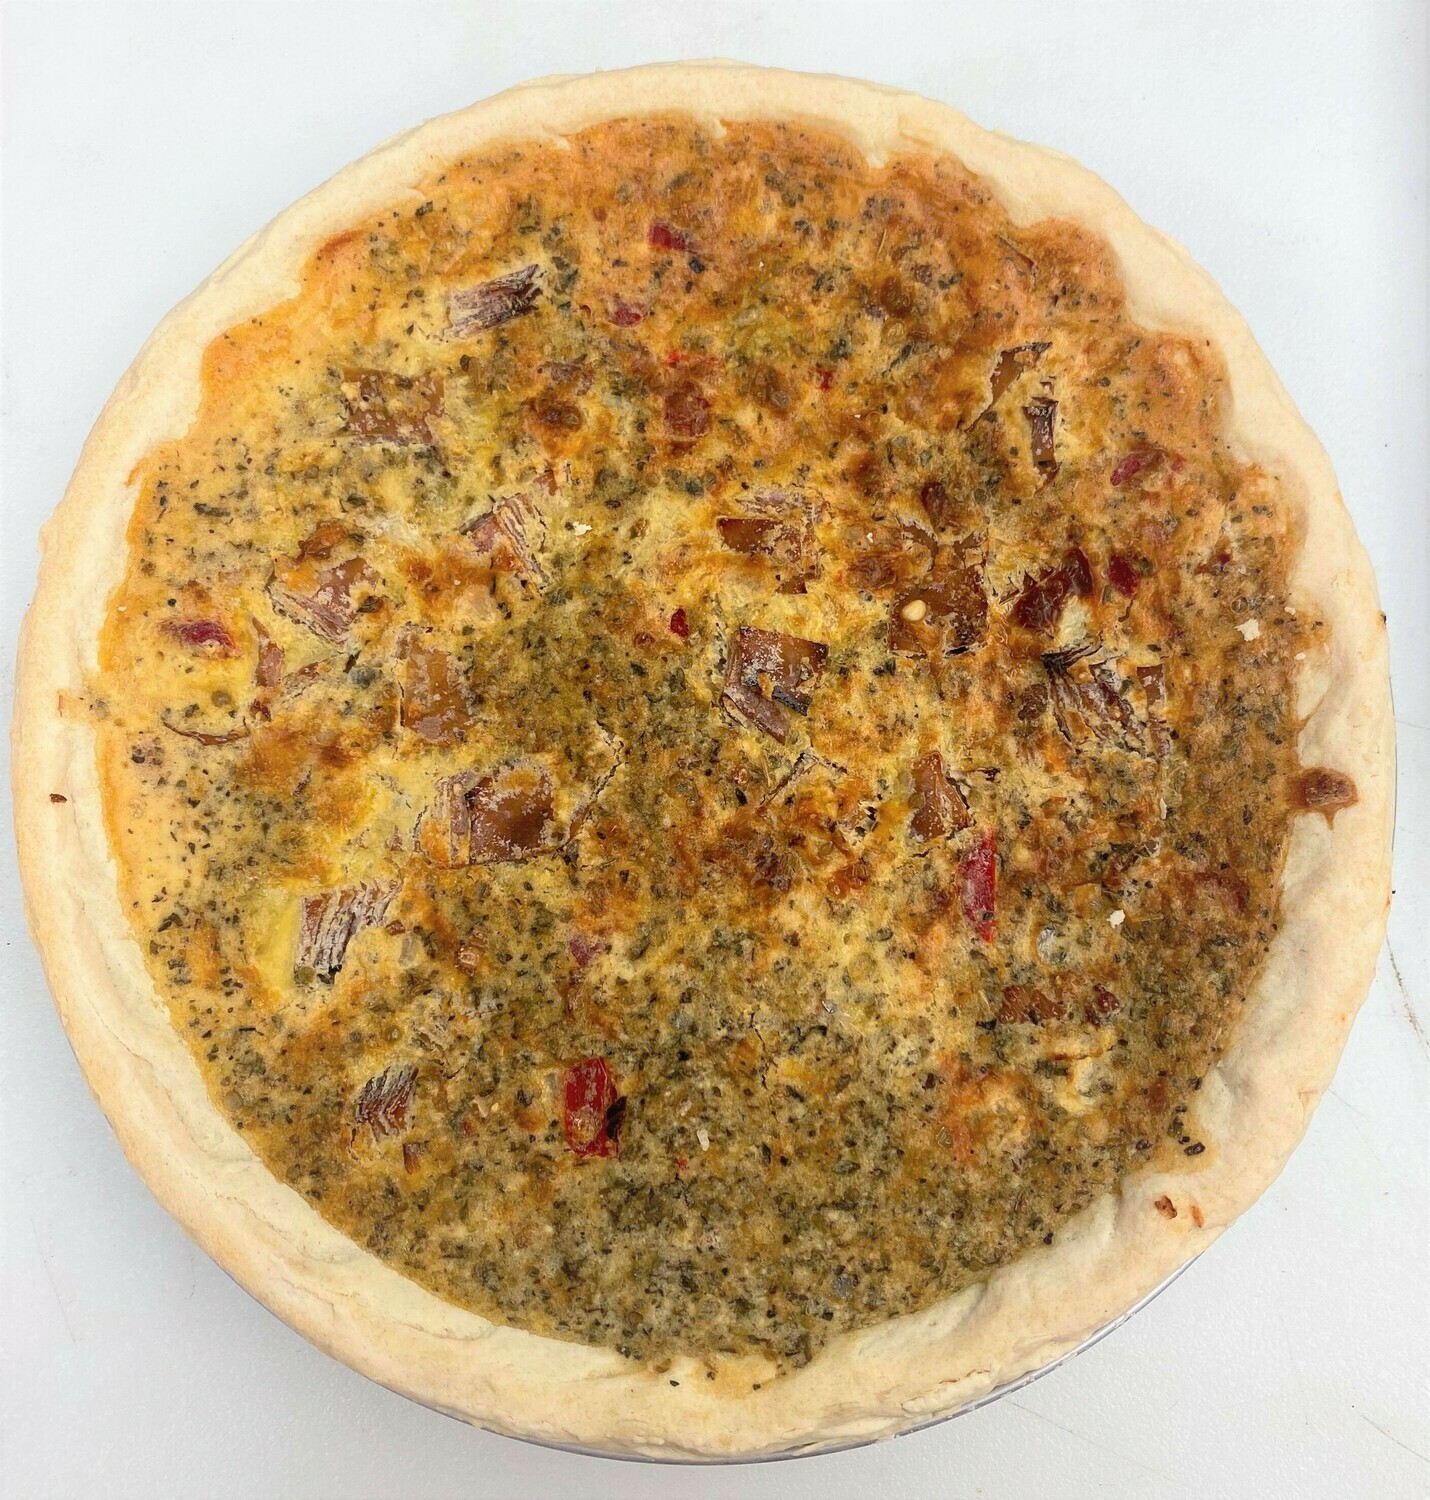 Bake at Home - Quiche